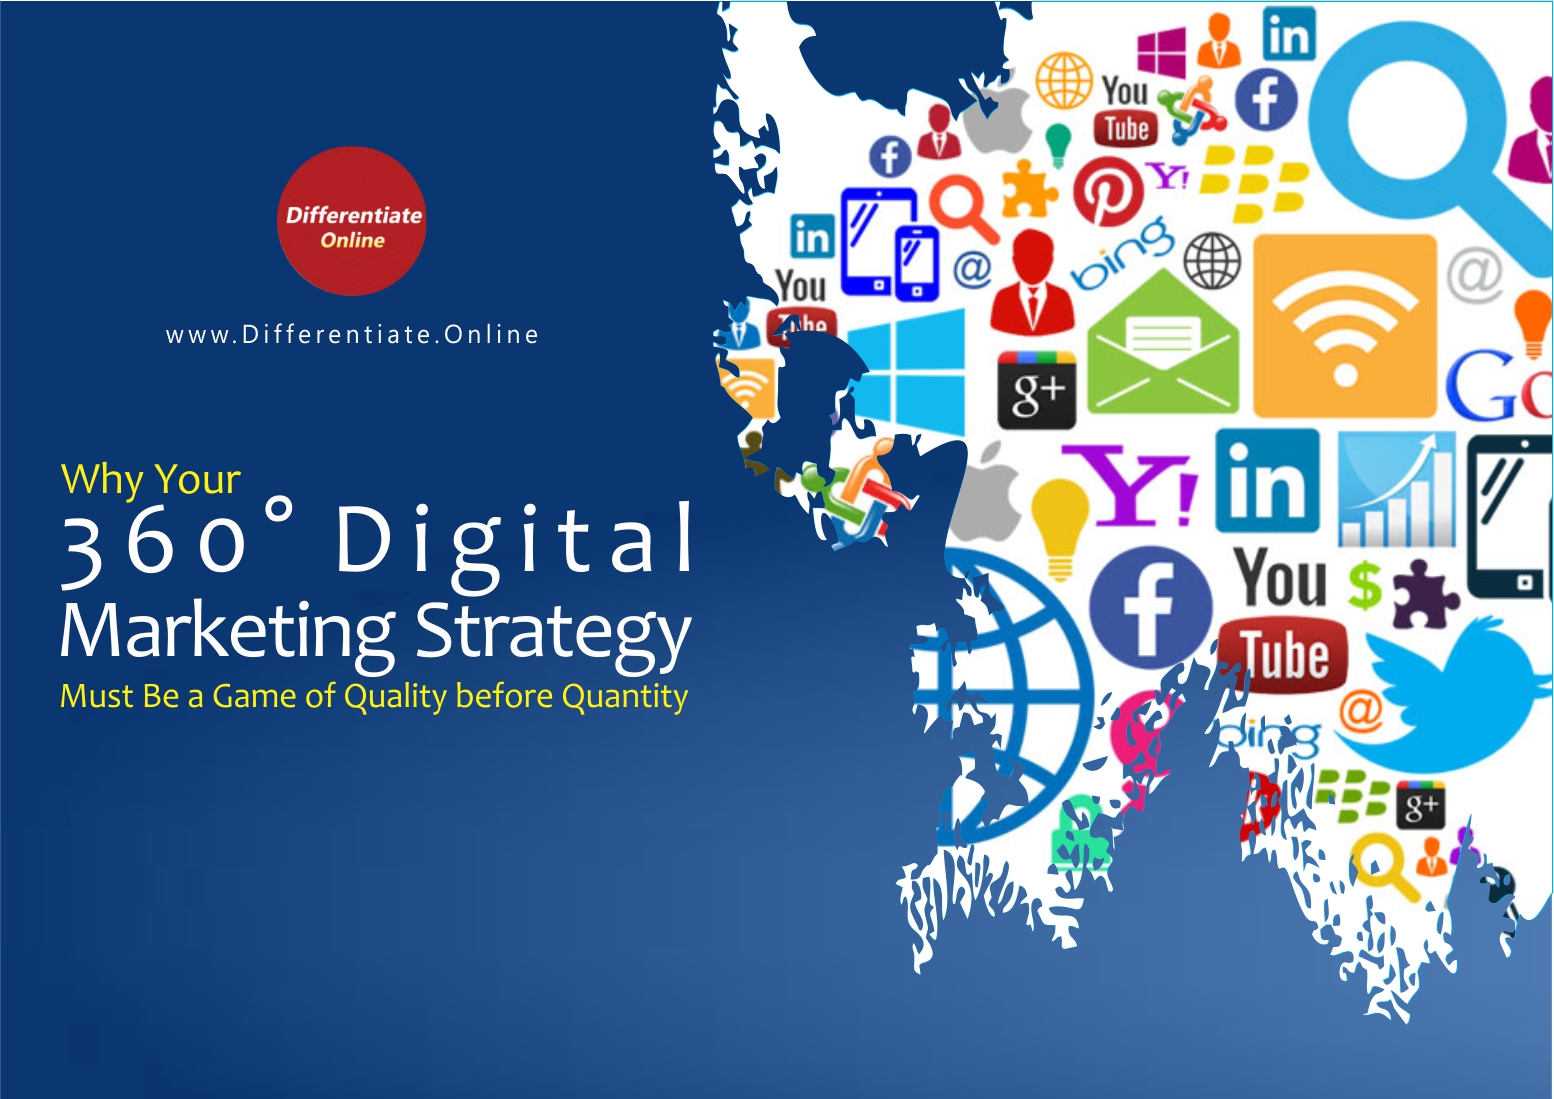 Why Your 360° Digital Marketing Strategy Must Be a Game of Quality Before Quantity